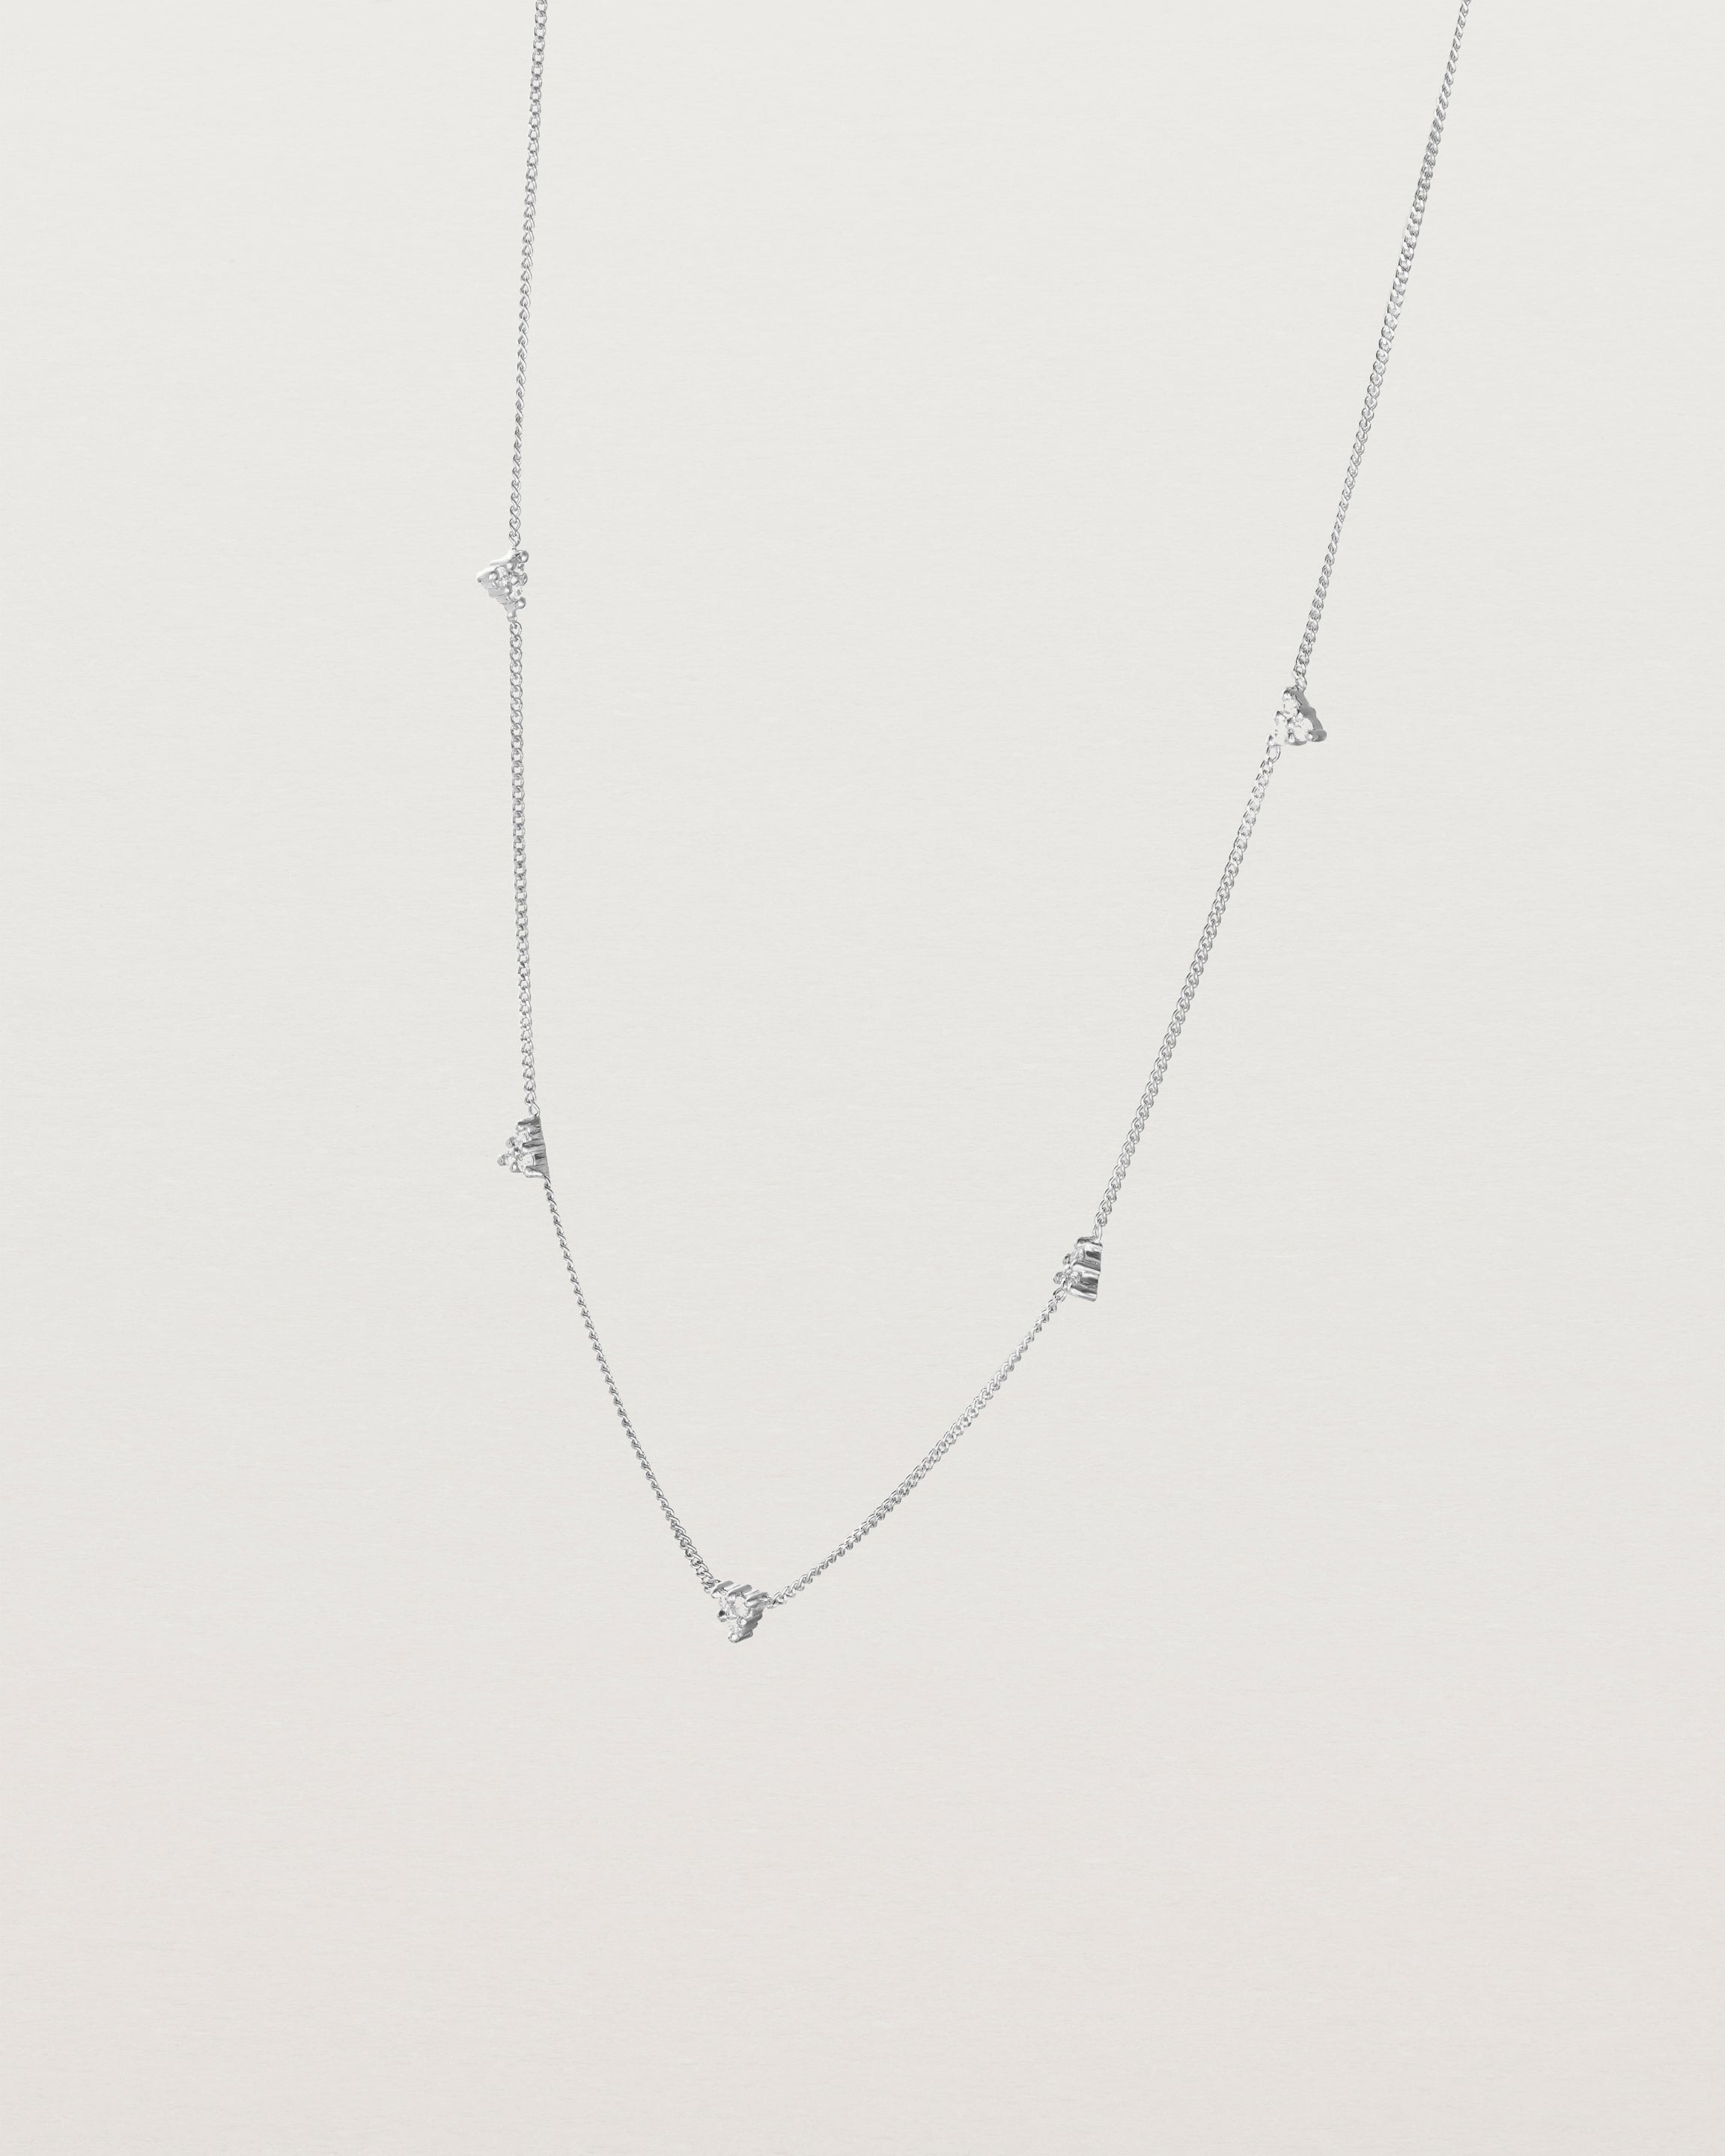 Angled view of the Full Kalani Necklace | Diamonds in white gold. 